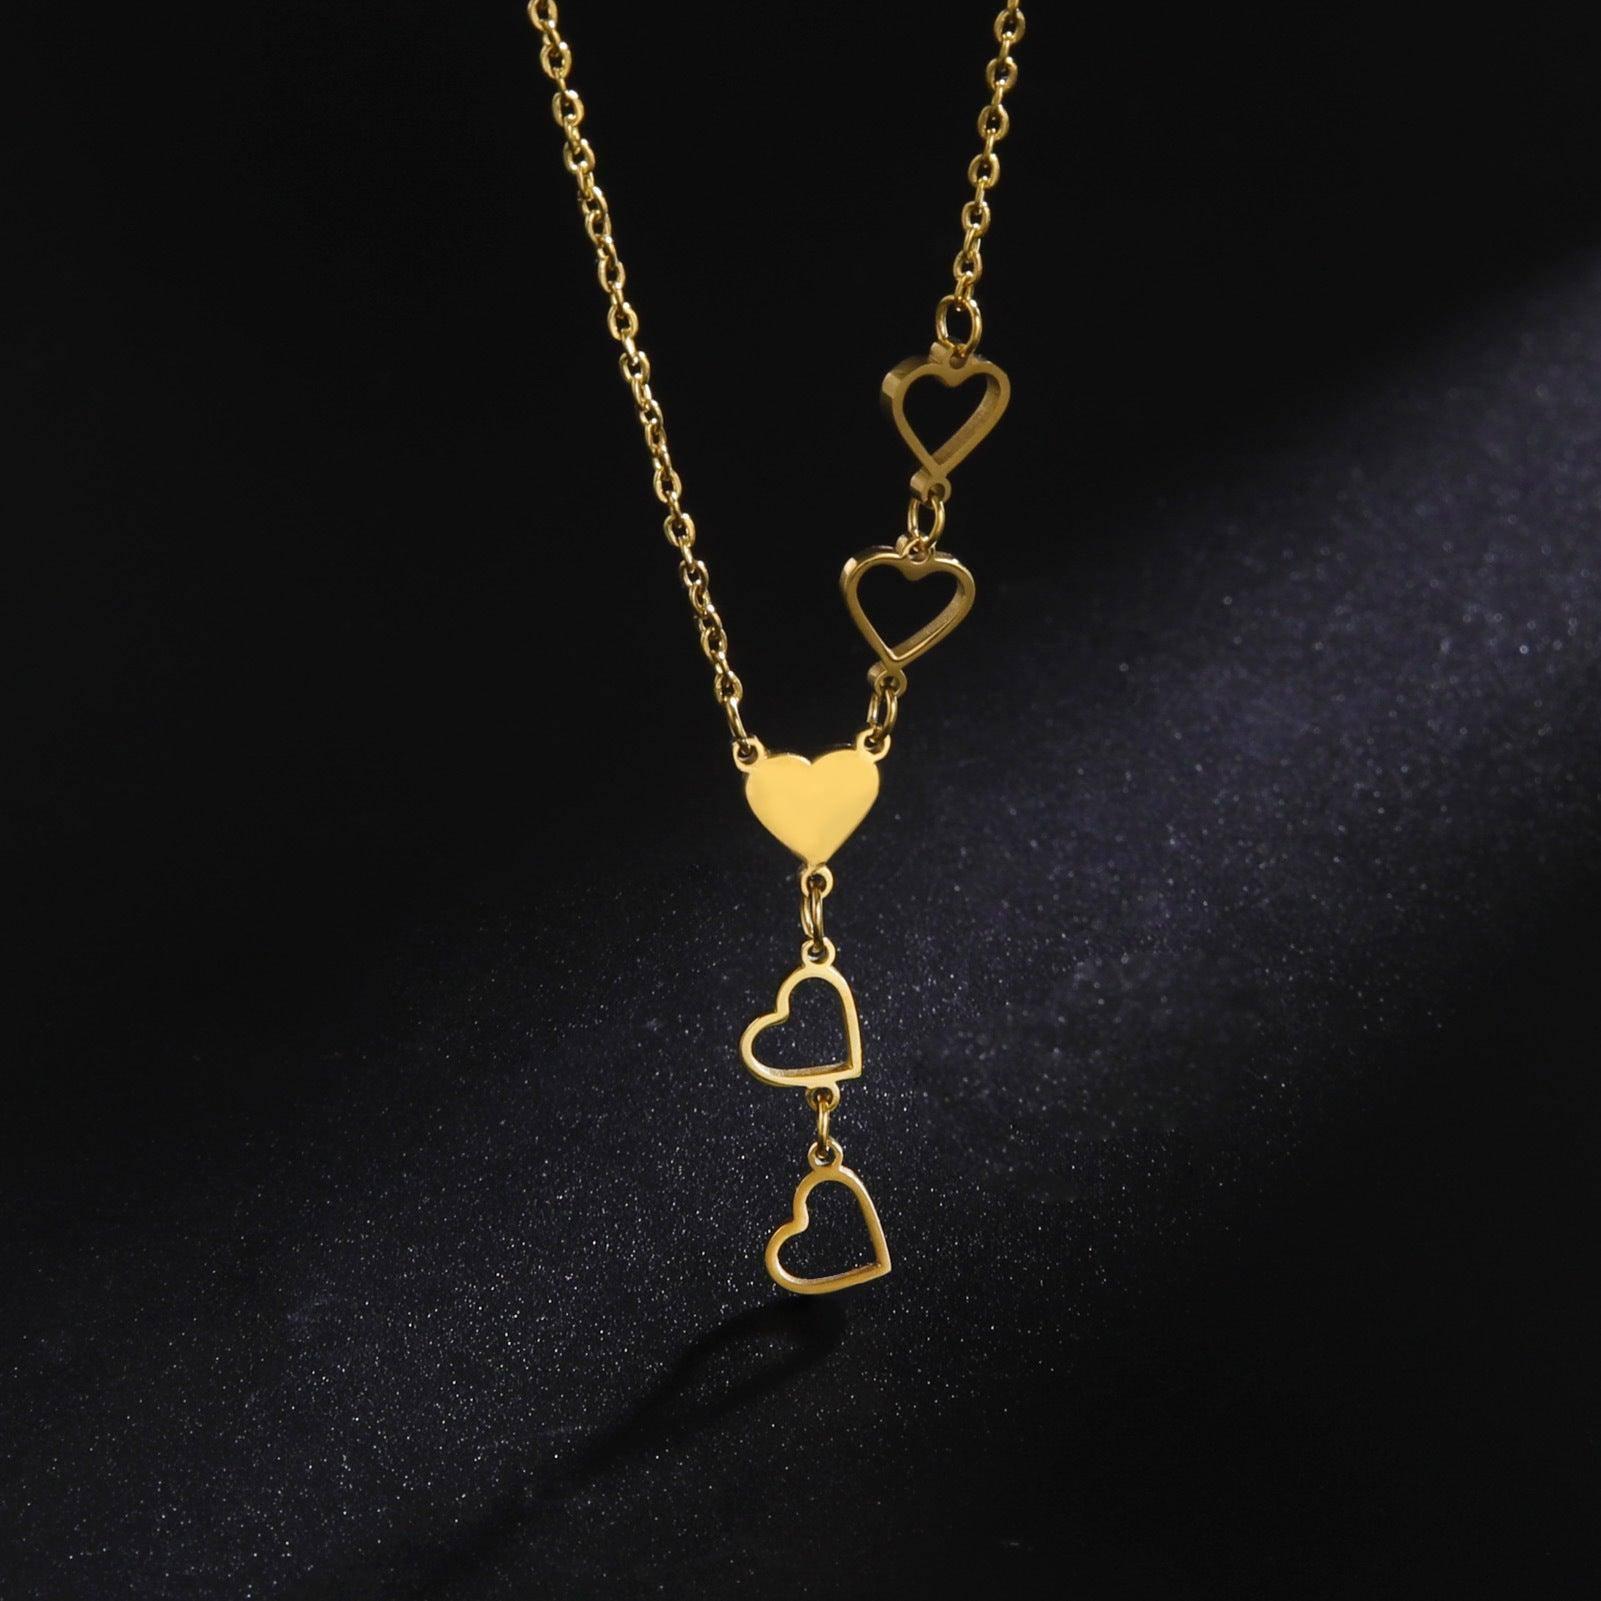 Chic Heart Chain Necklaces in Silver and Gold-2